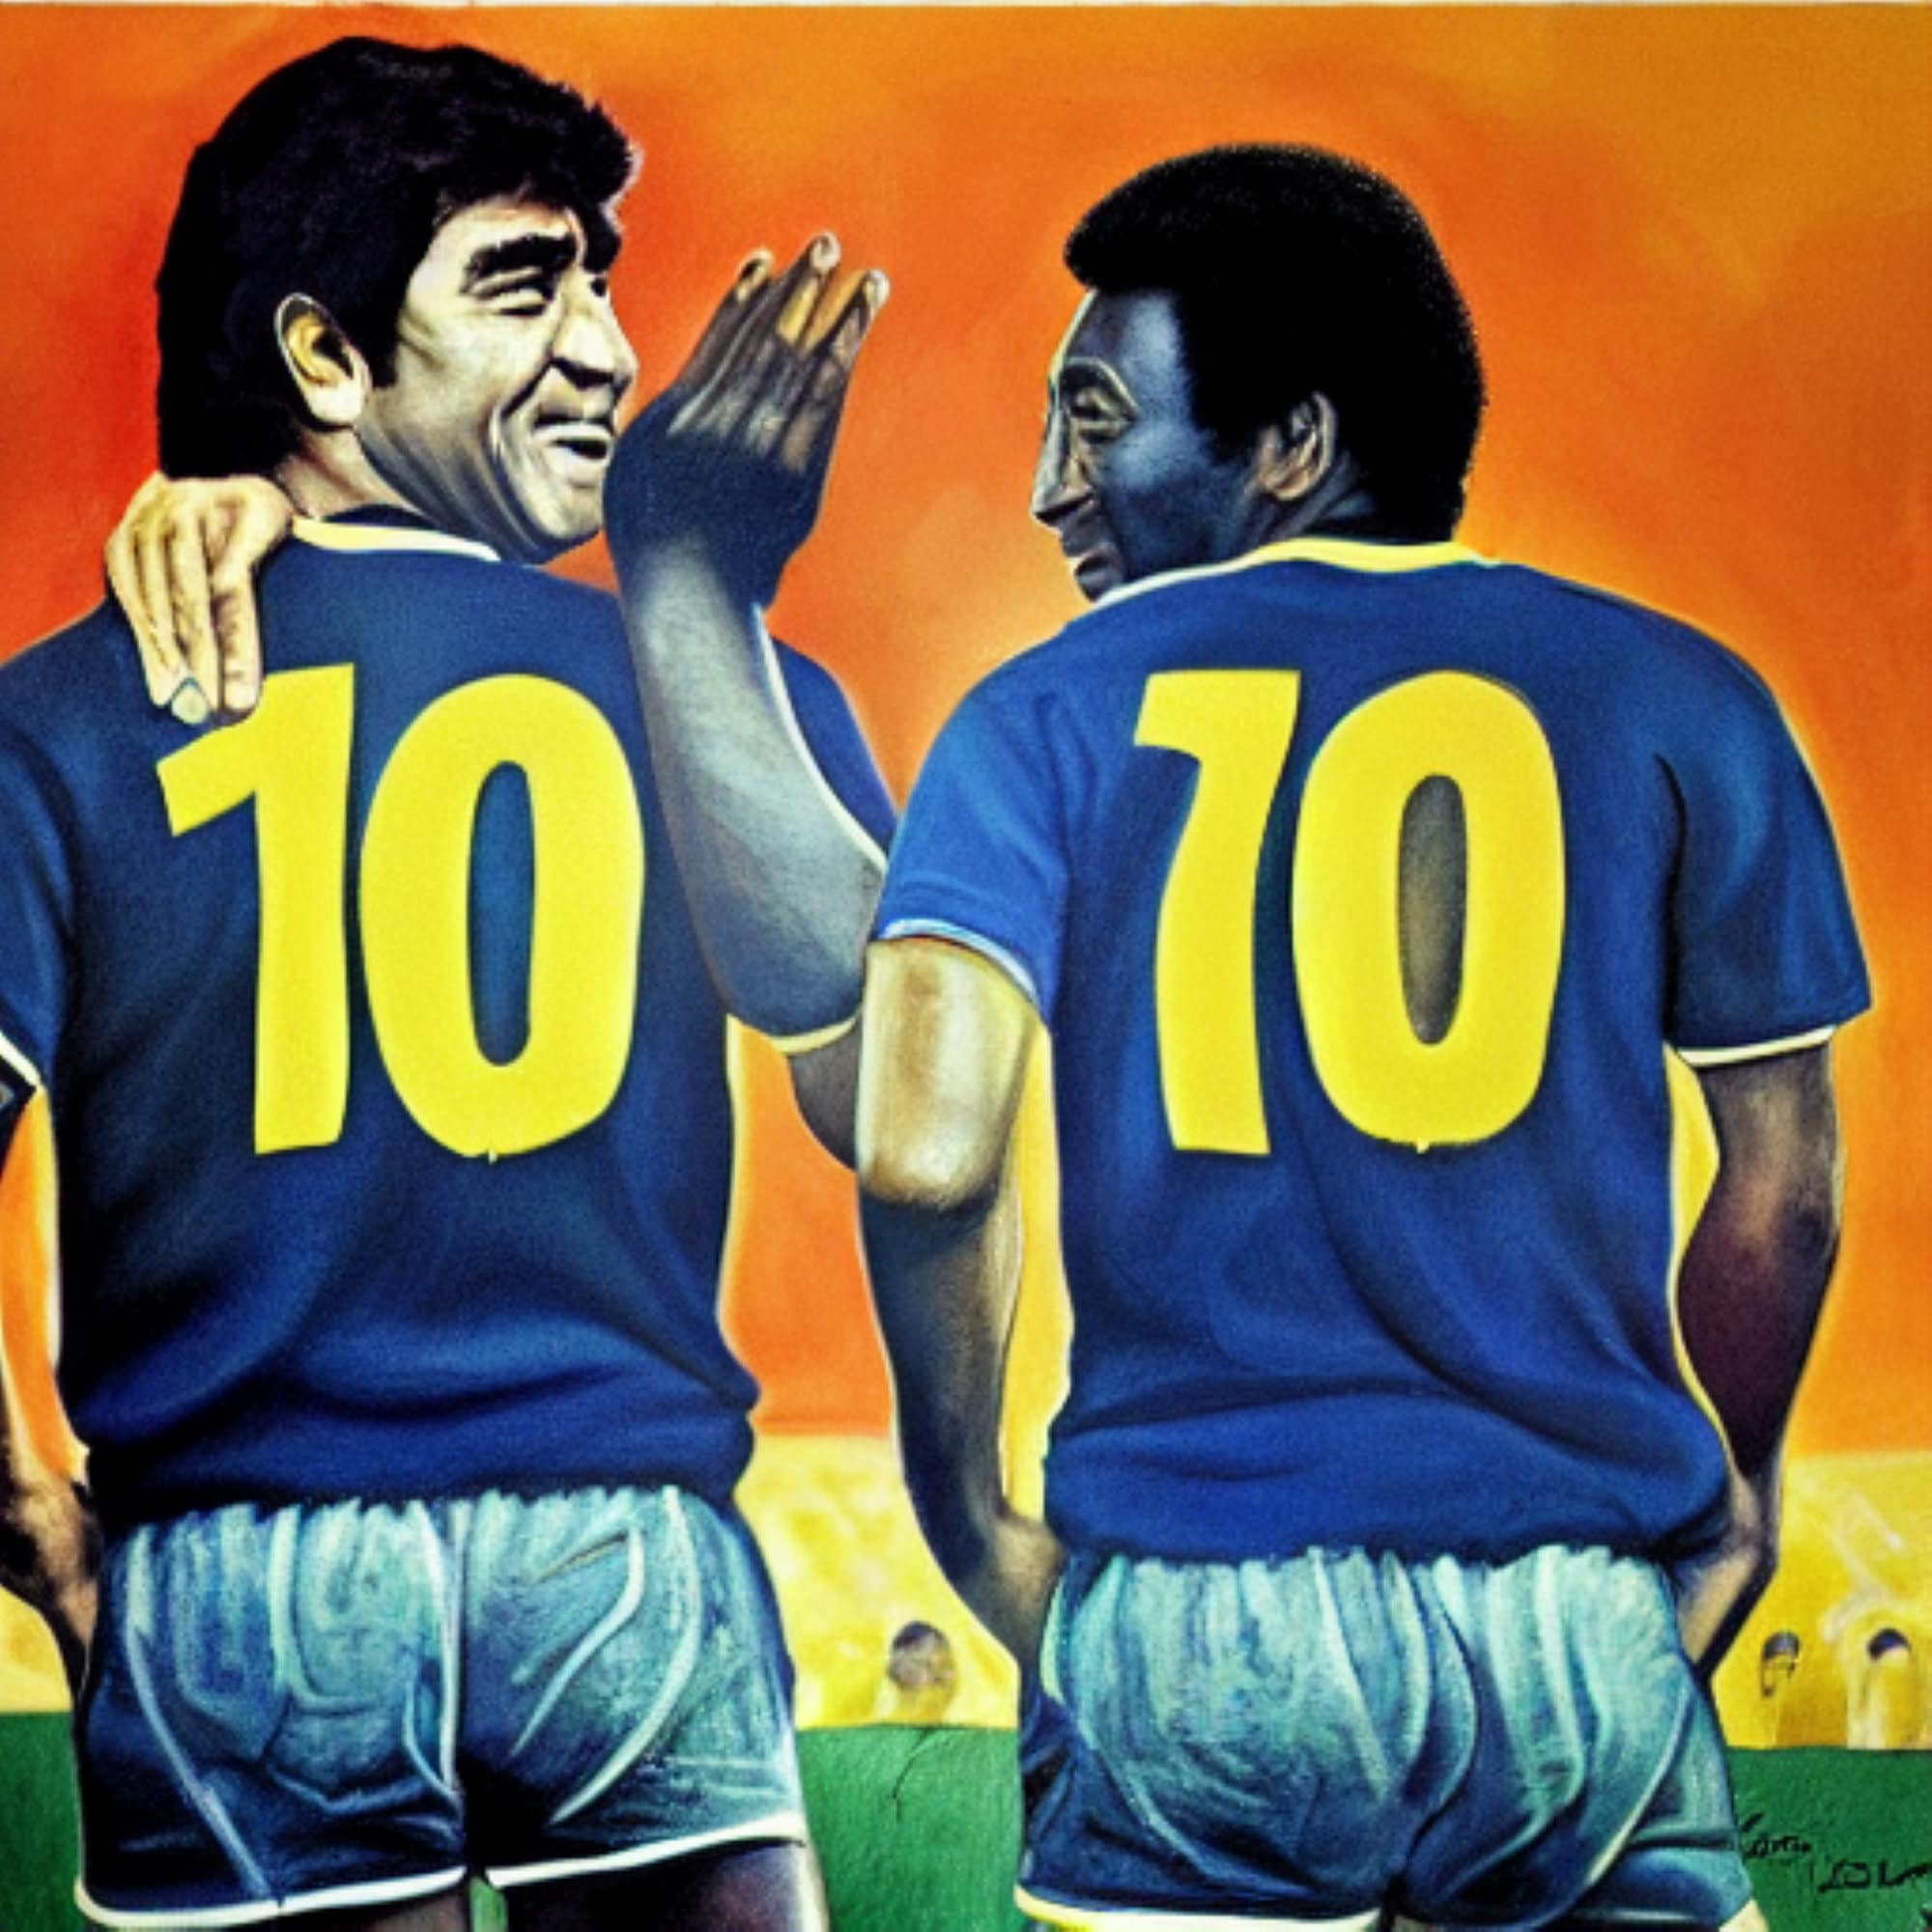 Pelé and Maradona in Heaven Artwork With Their Number 10 